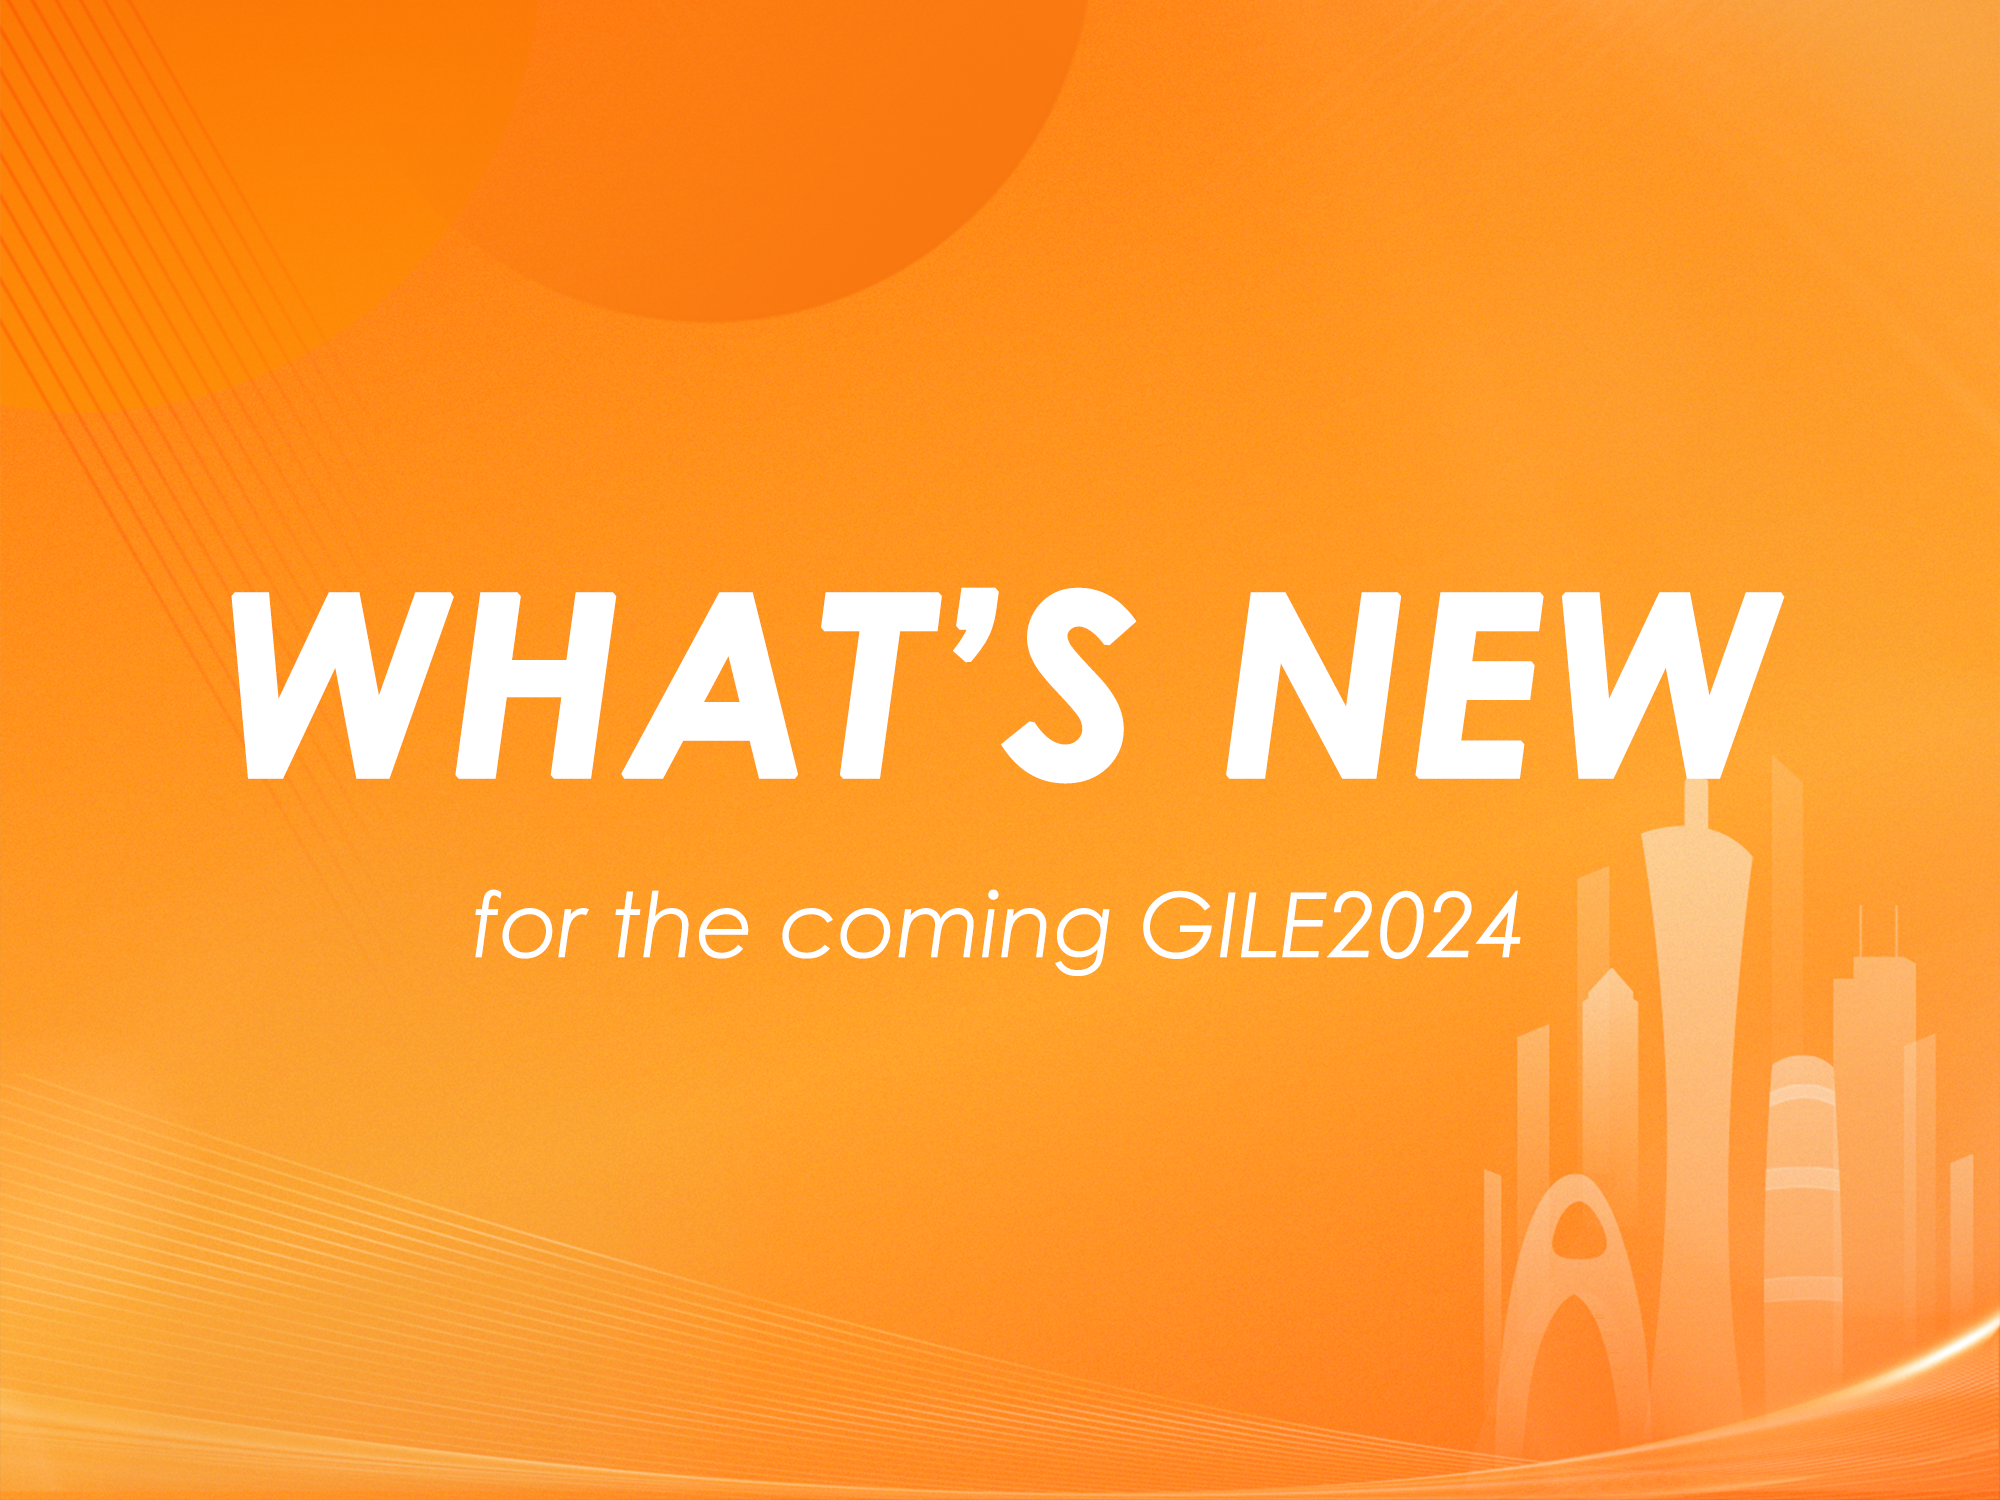 New Products for The Coming GILE2024